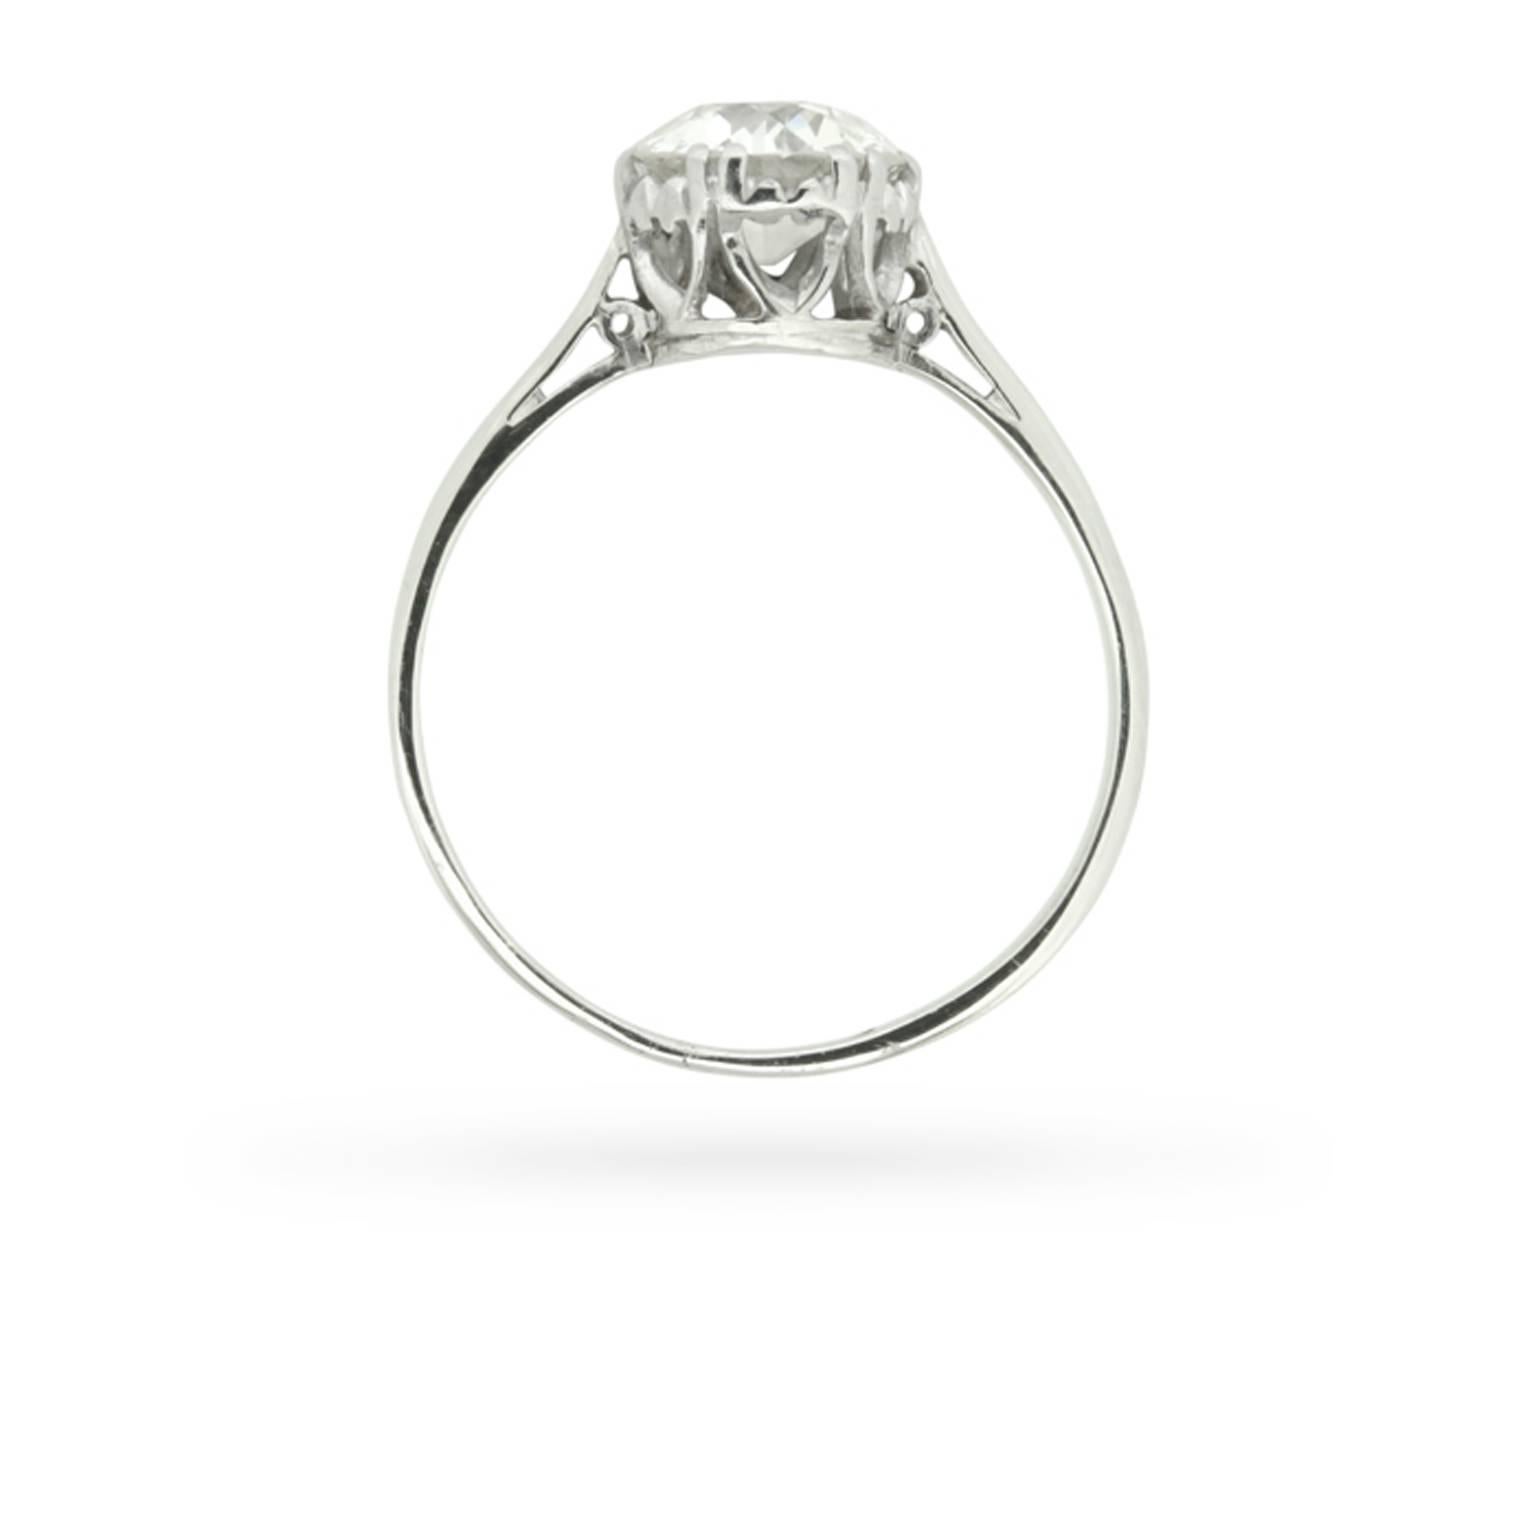 Exquisite in its simplicity, a 1.04 carat round old cut diamond is the solo performer in this circa 1910 diamond solitaire engagement ring. All handcrafted in platinum during the early years of the twentieth century, the ring’s split claws, openwork